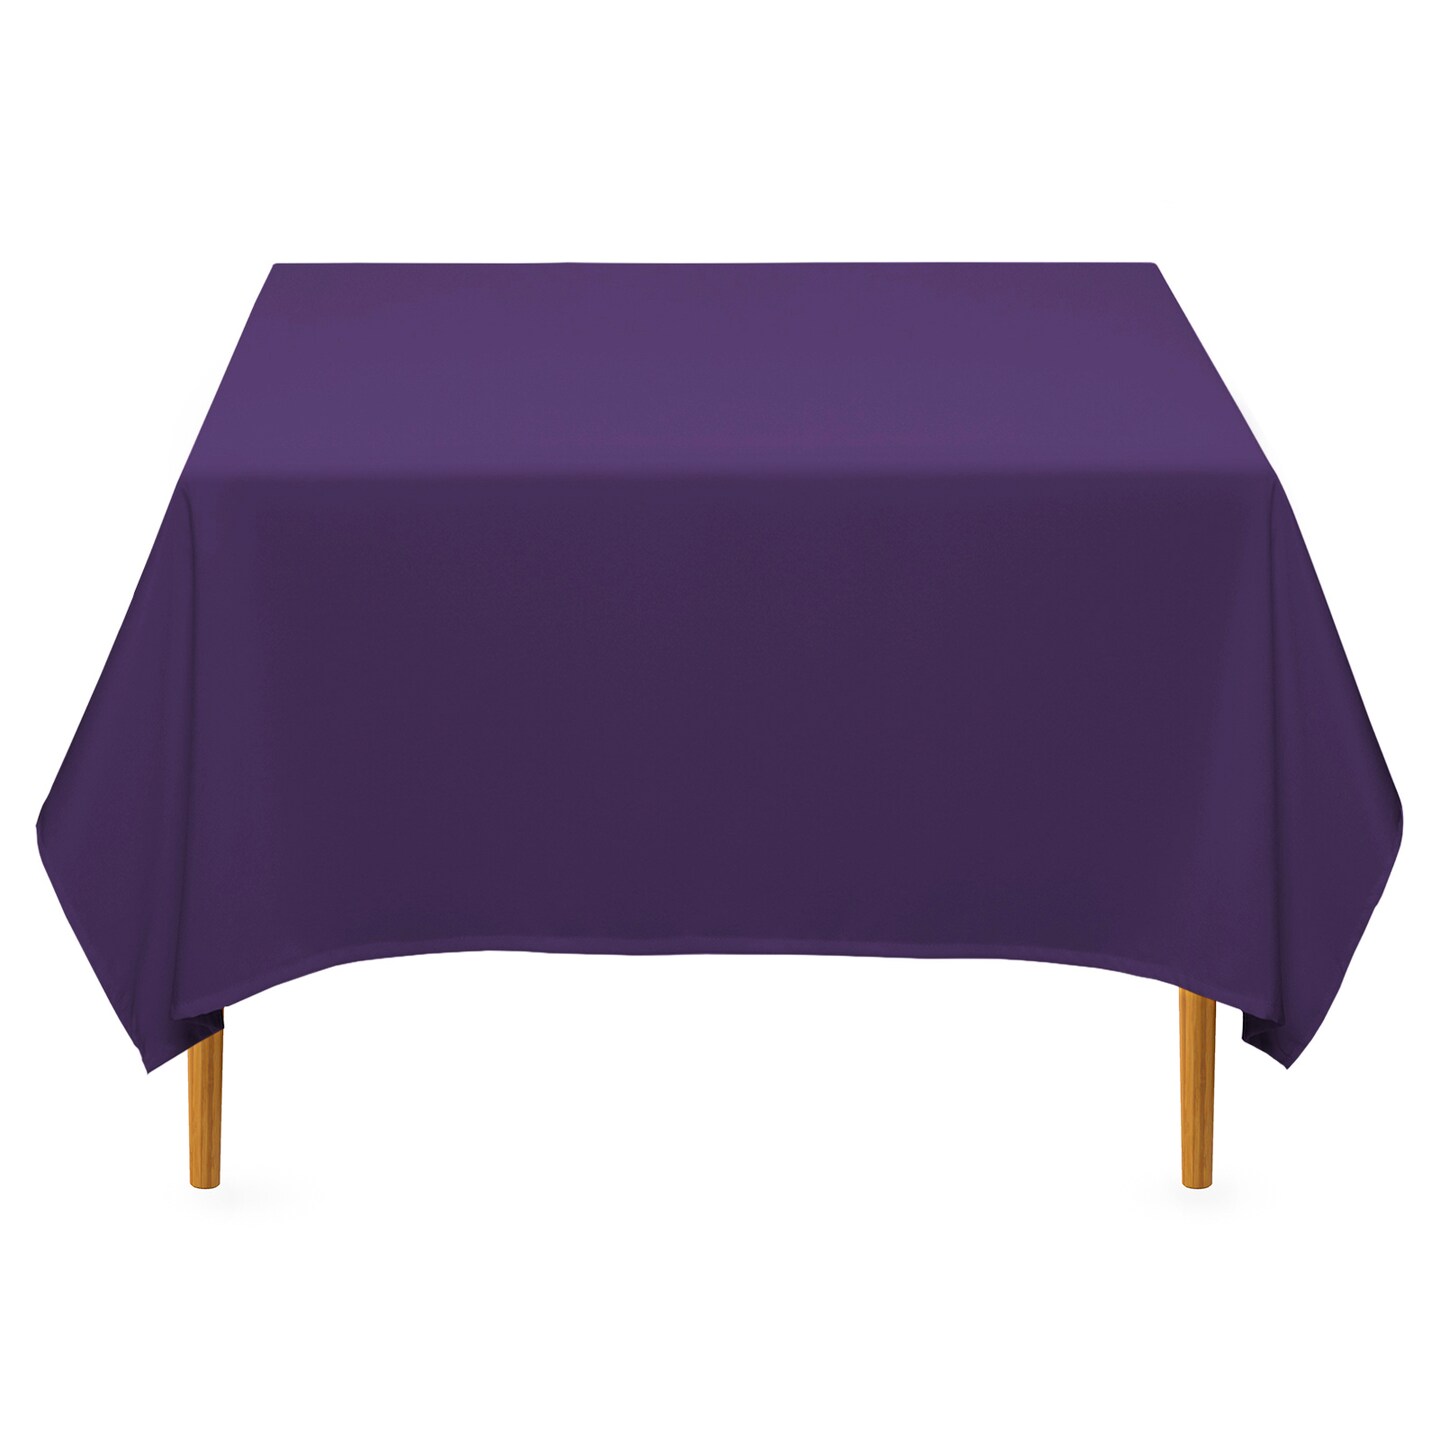 Lann&#x27;s Linens - Square Premium Tablecloth for Wedding / Banquet / Restaurant - Polyester Fabric Table Cloth